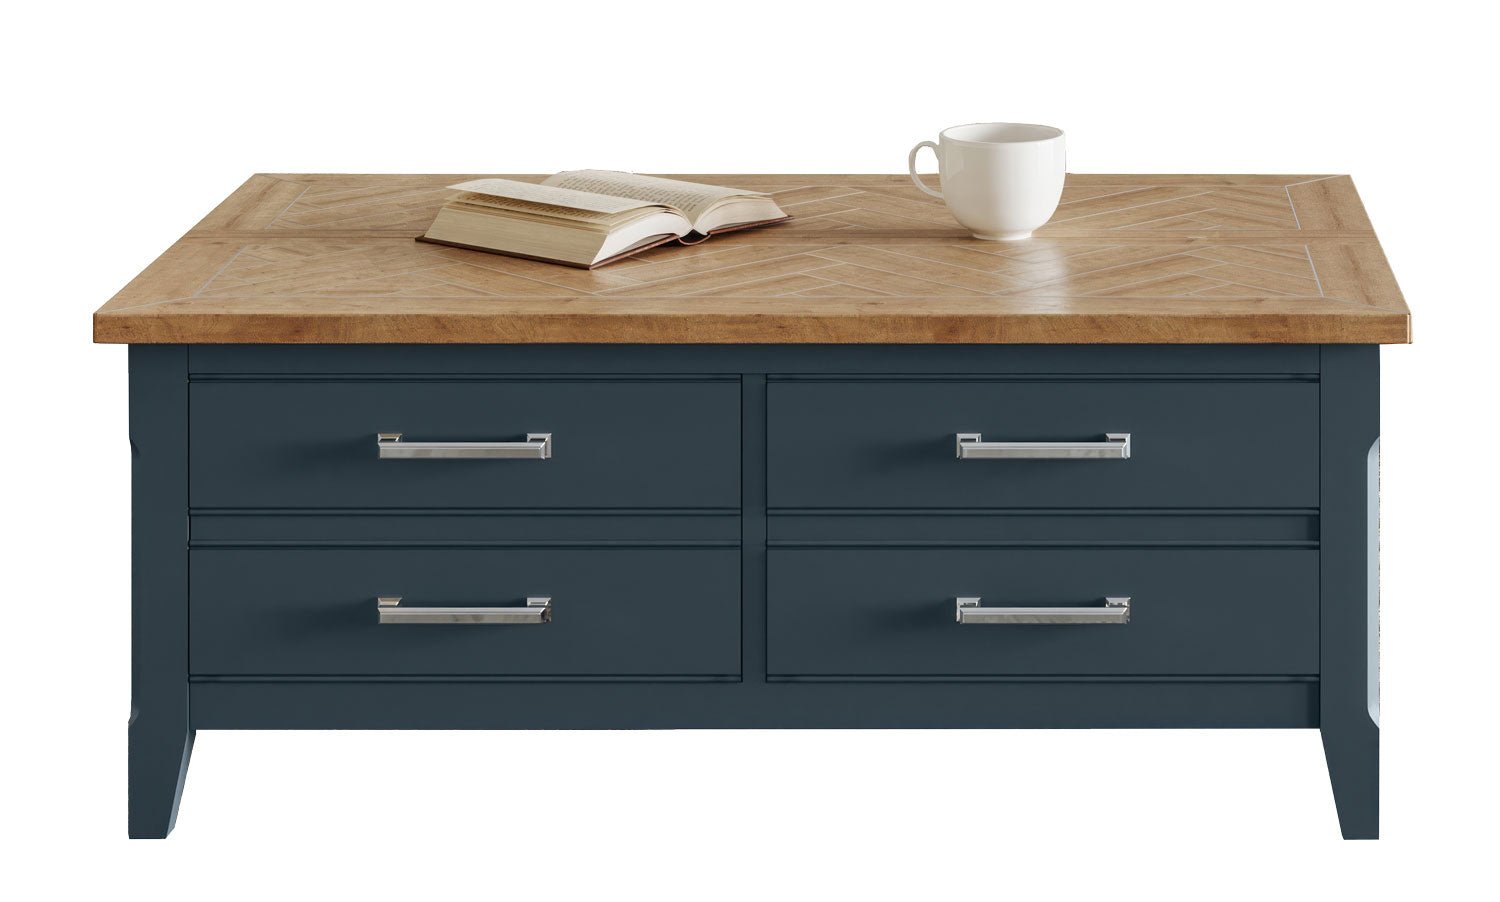 Signature Blue Coffee Table With Drawers & Hidden Storage - Duck Barn Interiors